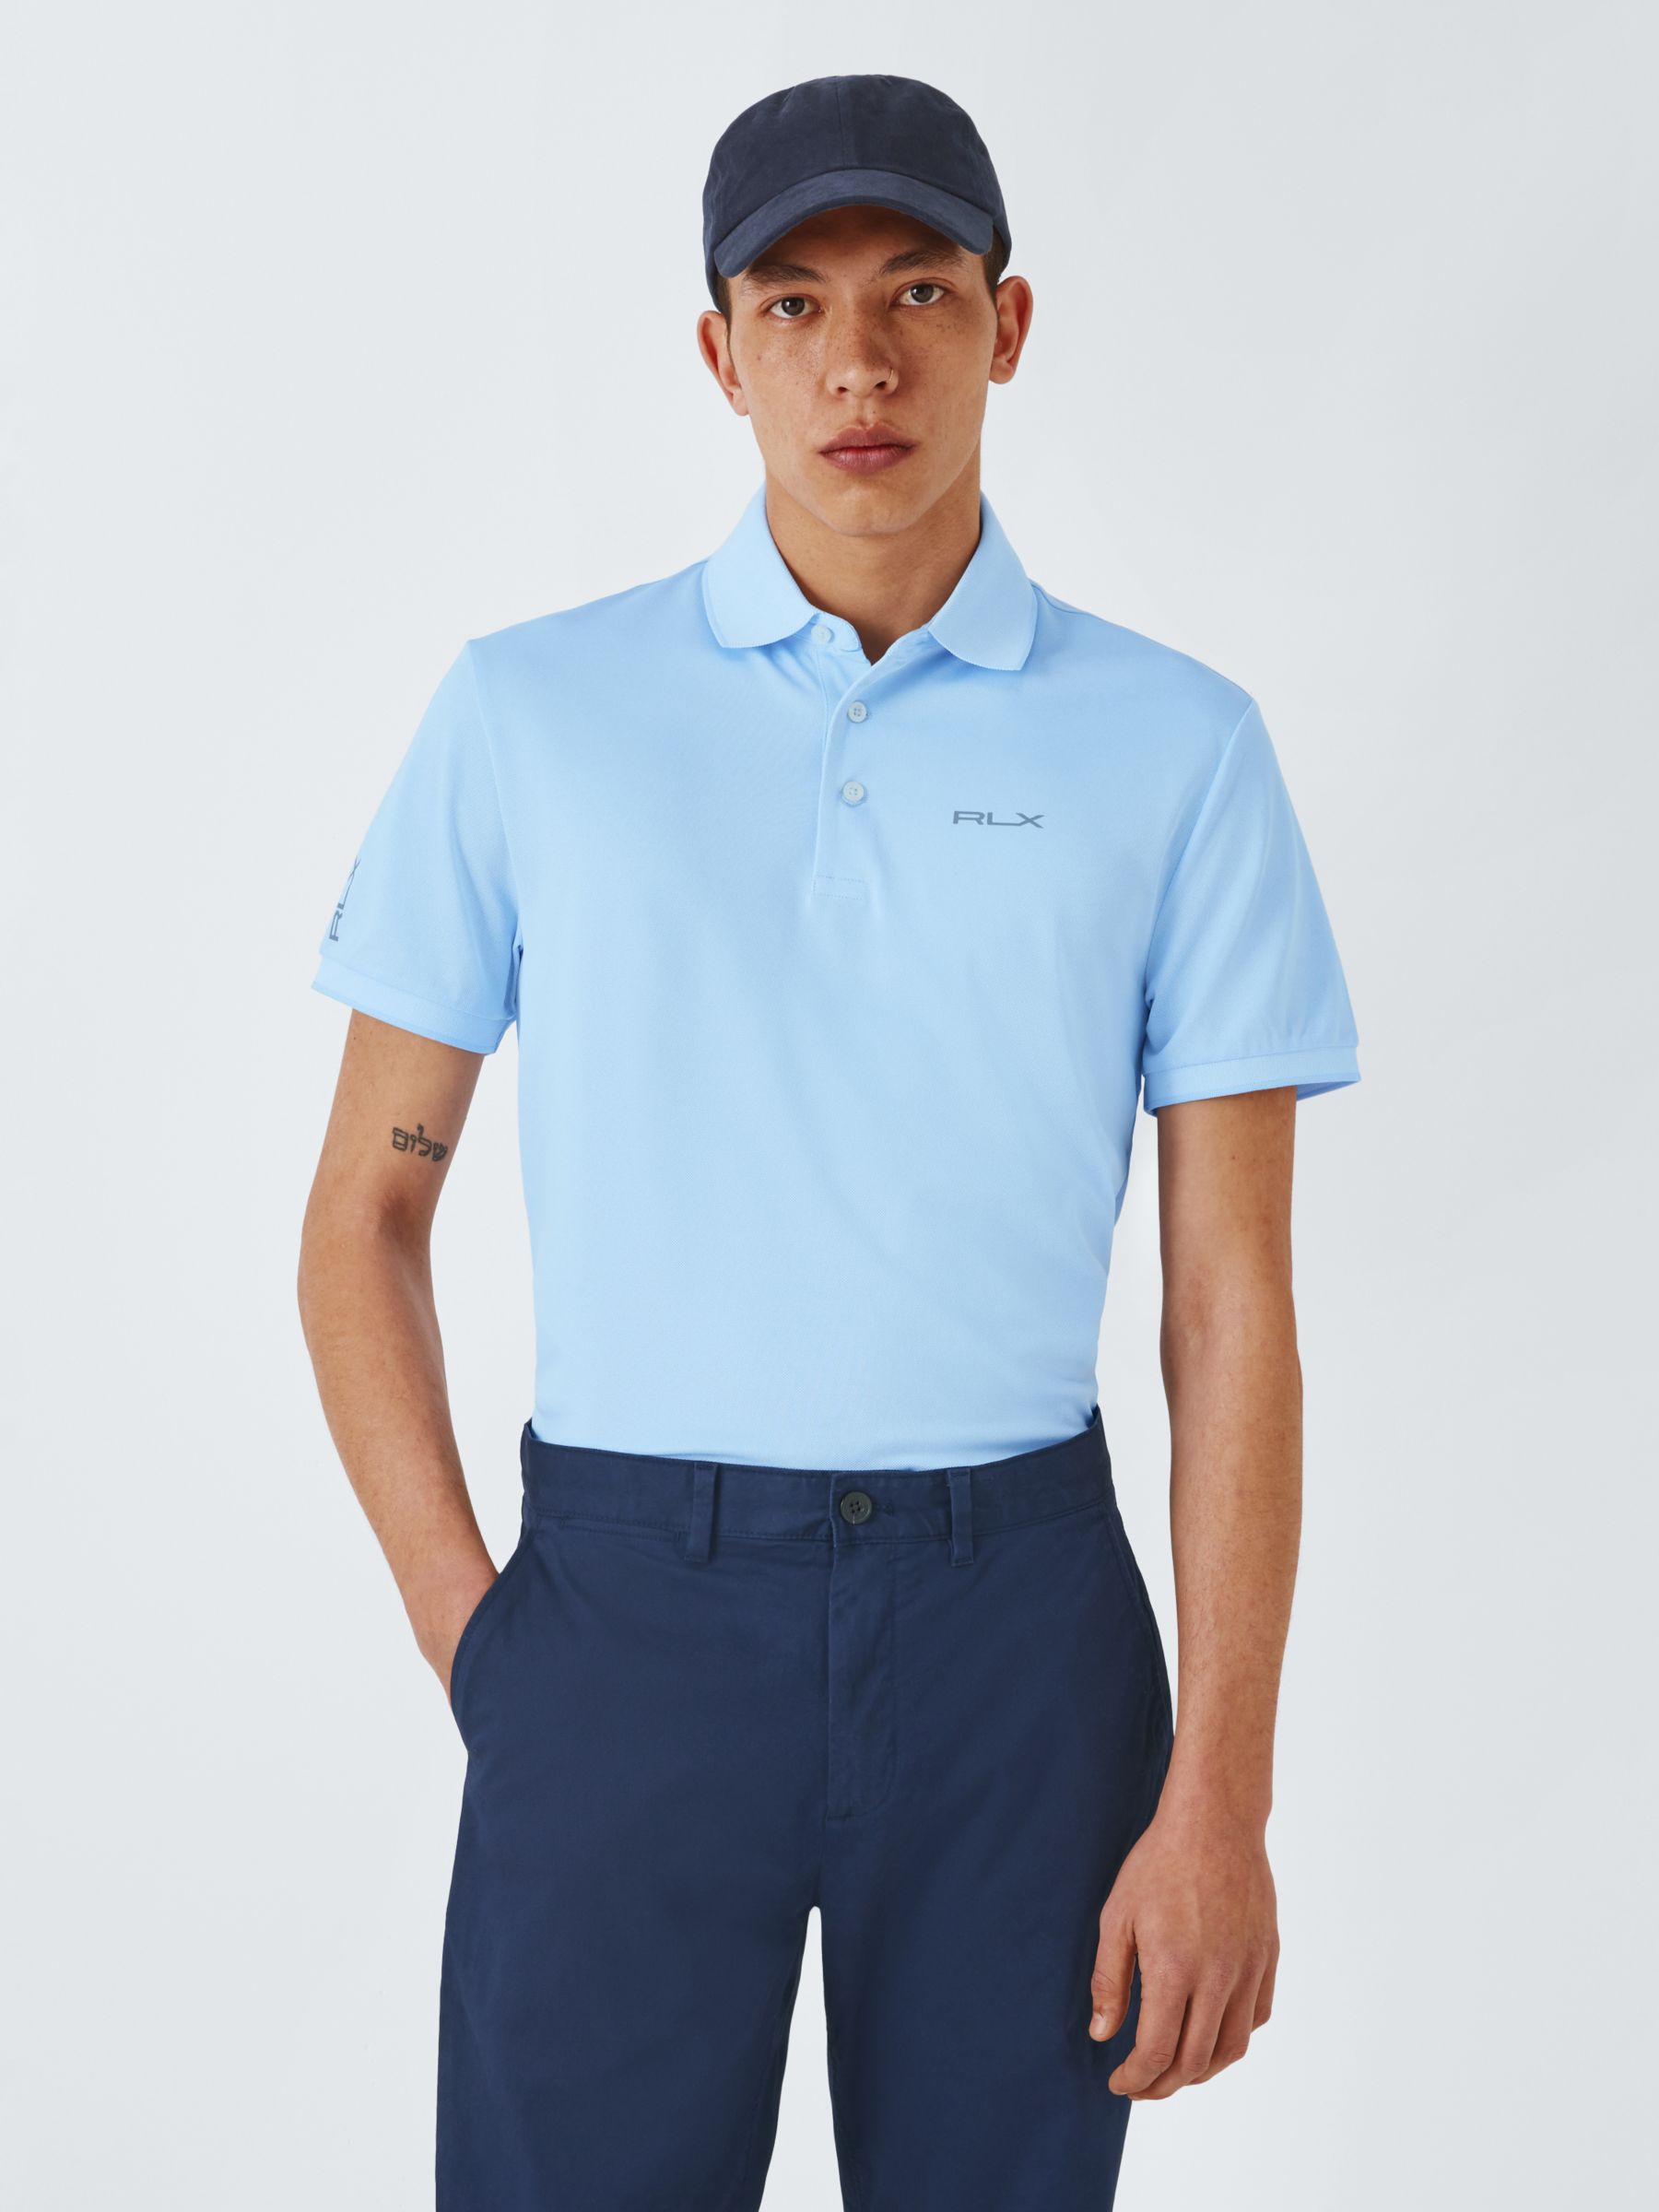 Polo Golf RLX Ralph Lauren Tailored Fit Performance Polo Shirt, Office ...